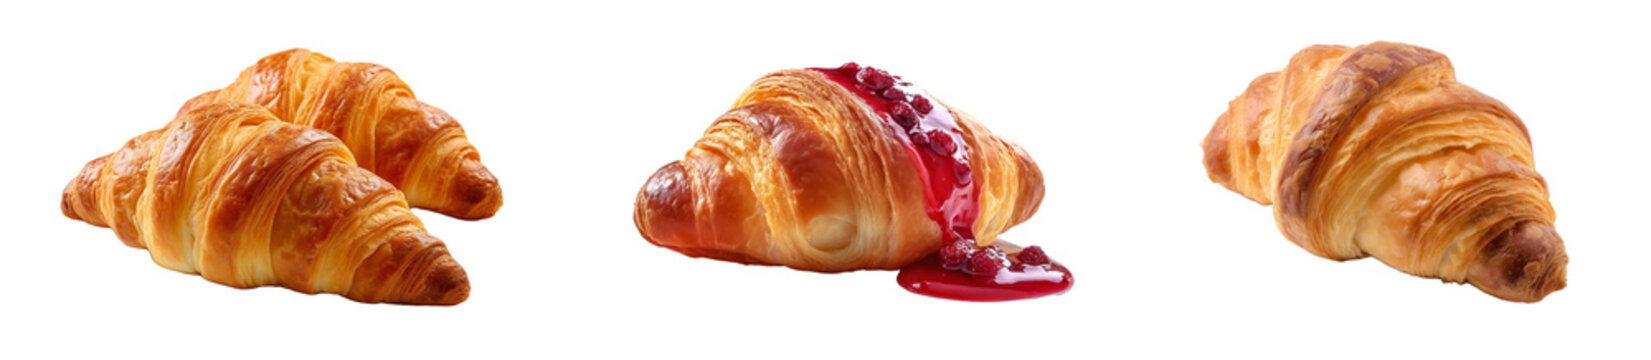 A set of three types of croissants. Natural croissants culinary design elements, side view. Fresh croissants from the bakery. Isolated on transparent background. KI.